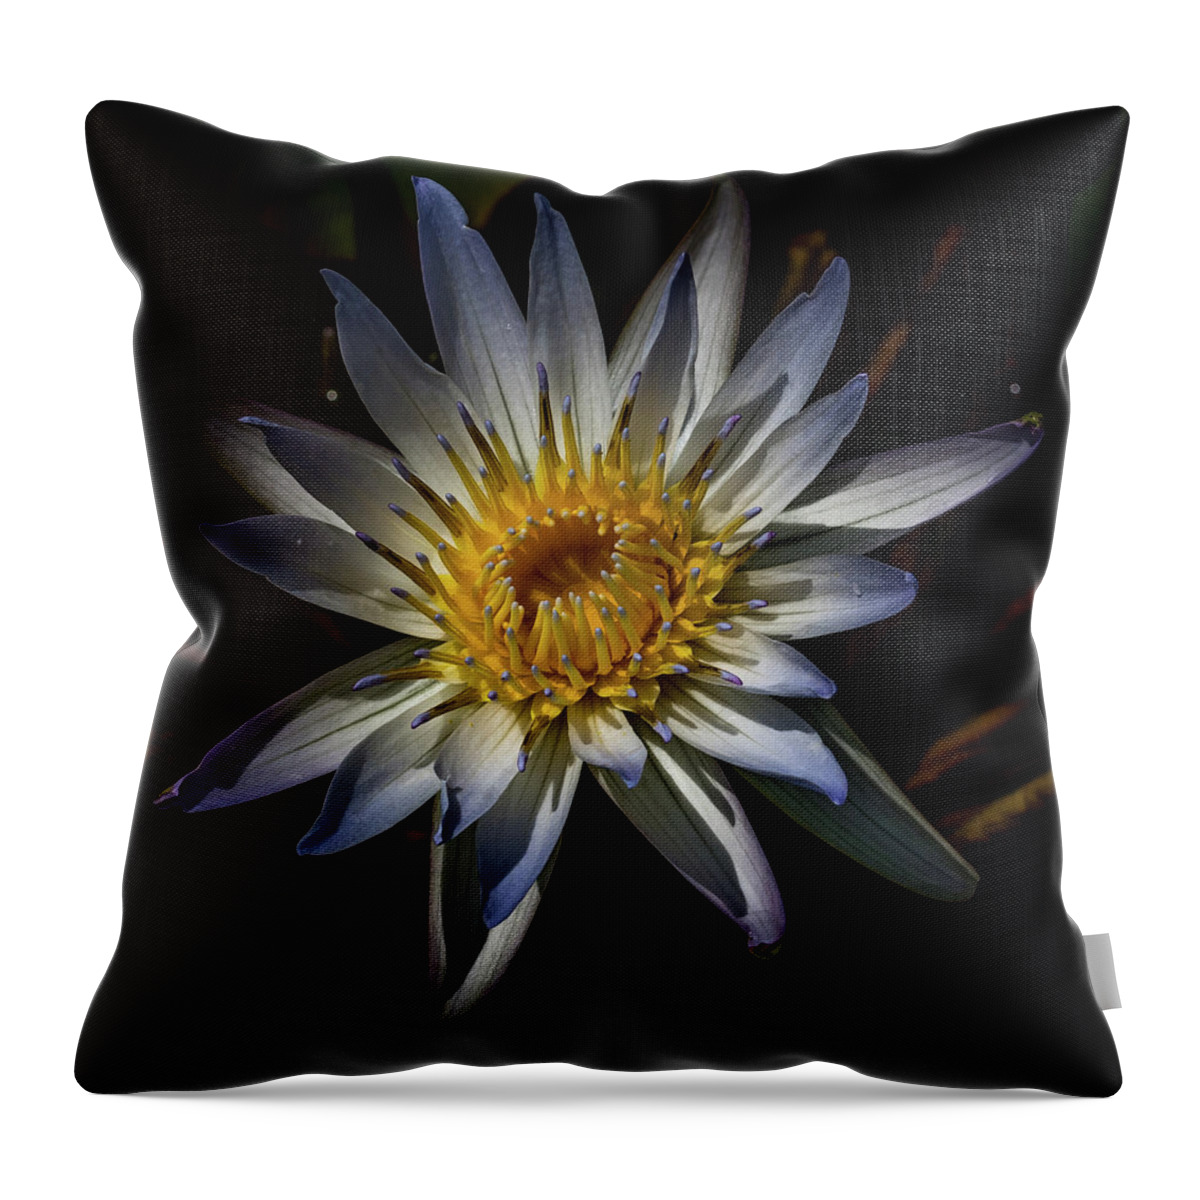 Lily Throw Pillow featuring the photograph Yellow Water Lily by Paul Freidlund